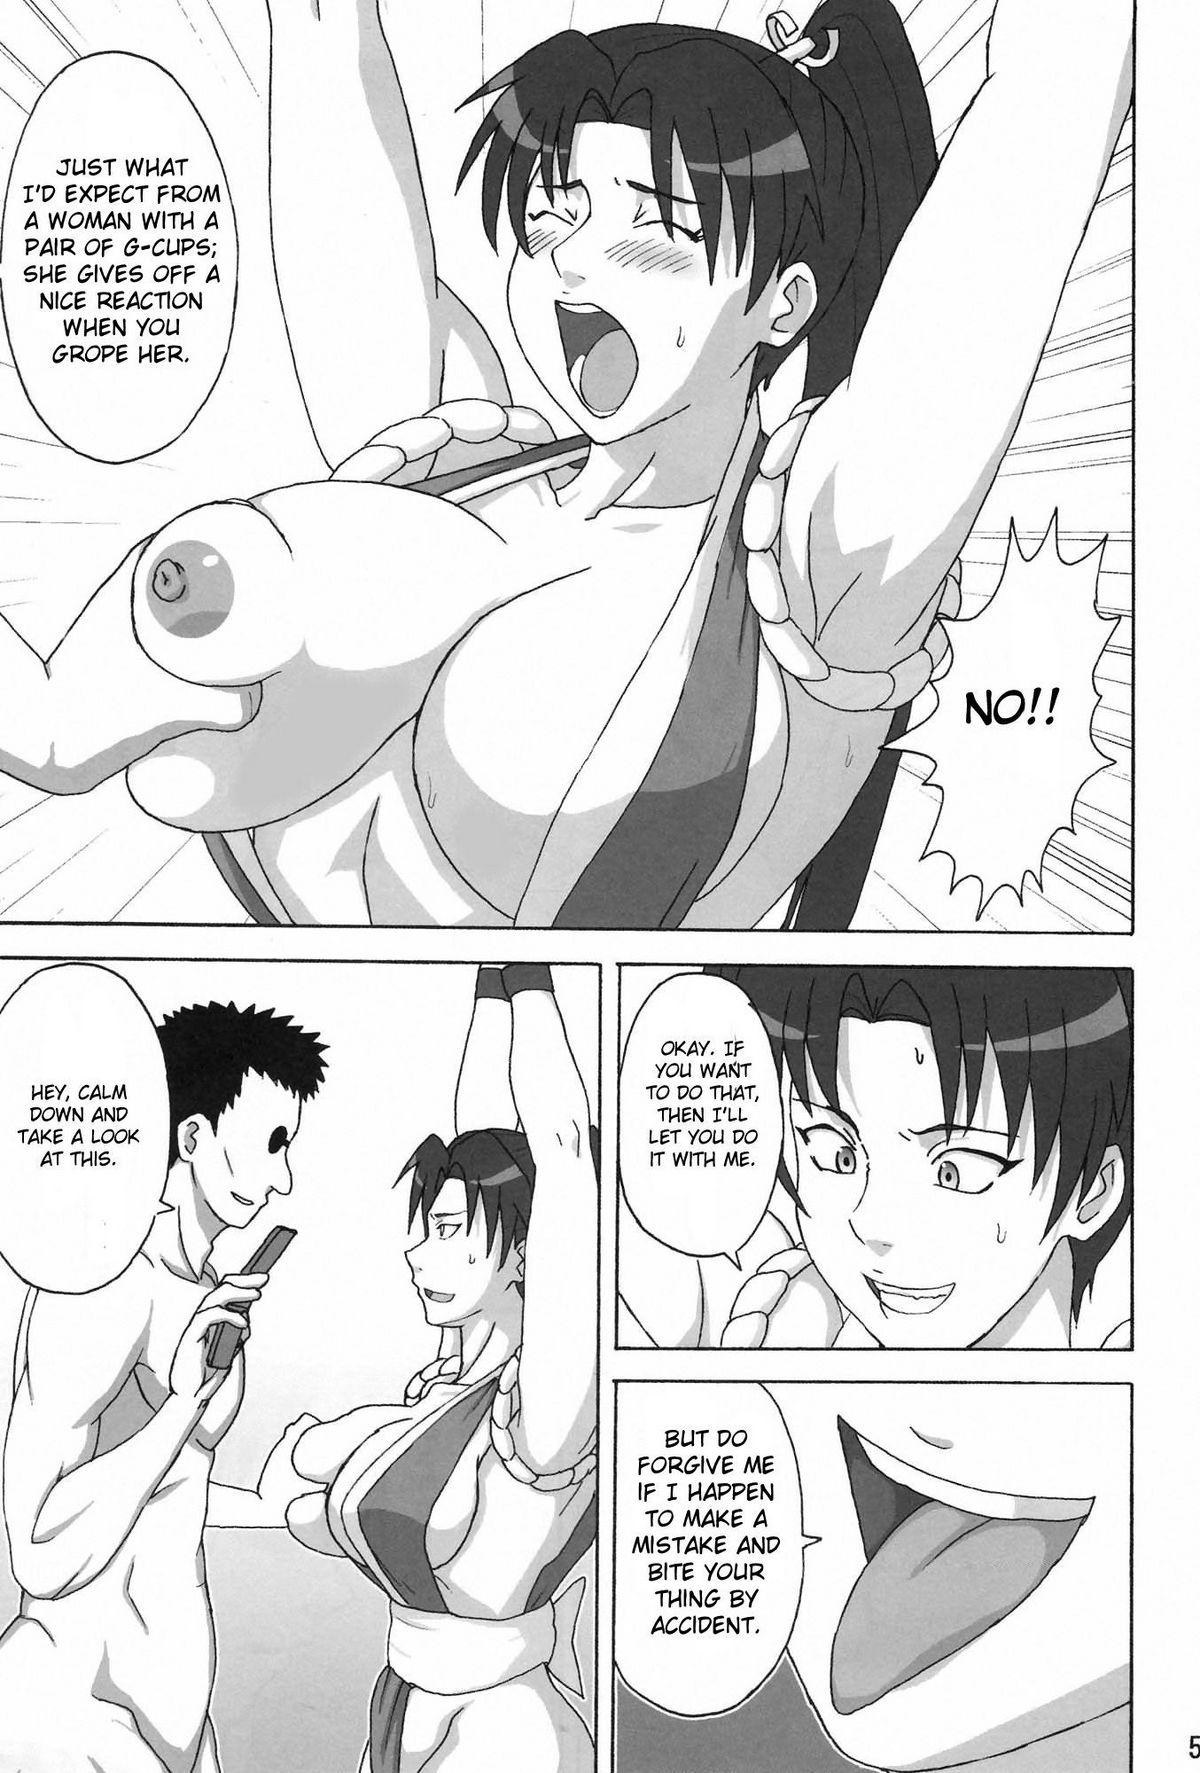 Pretty Mai x 3 - King of fighters Fatal fury Indian Sex - Page 6